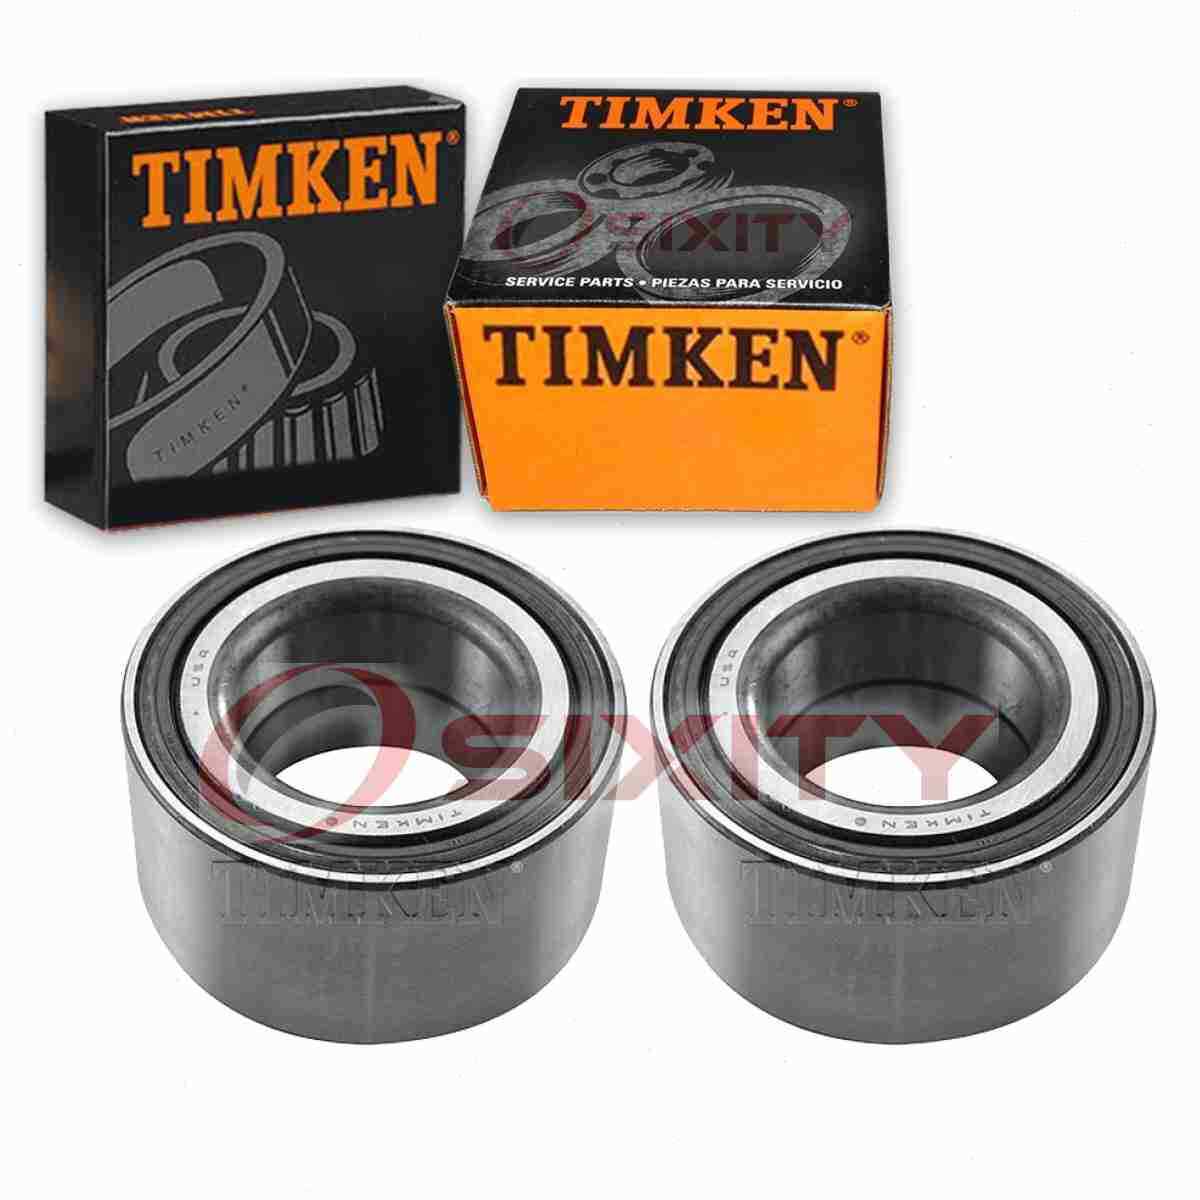 2 pc Timken Front Wheel Bearing and Race Sets for 2002-2005 Dodge Neon sw